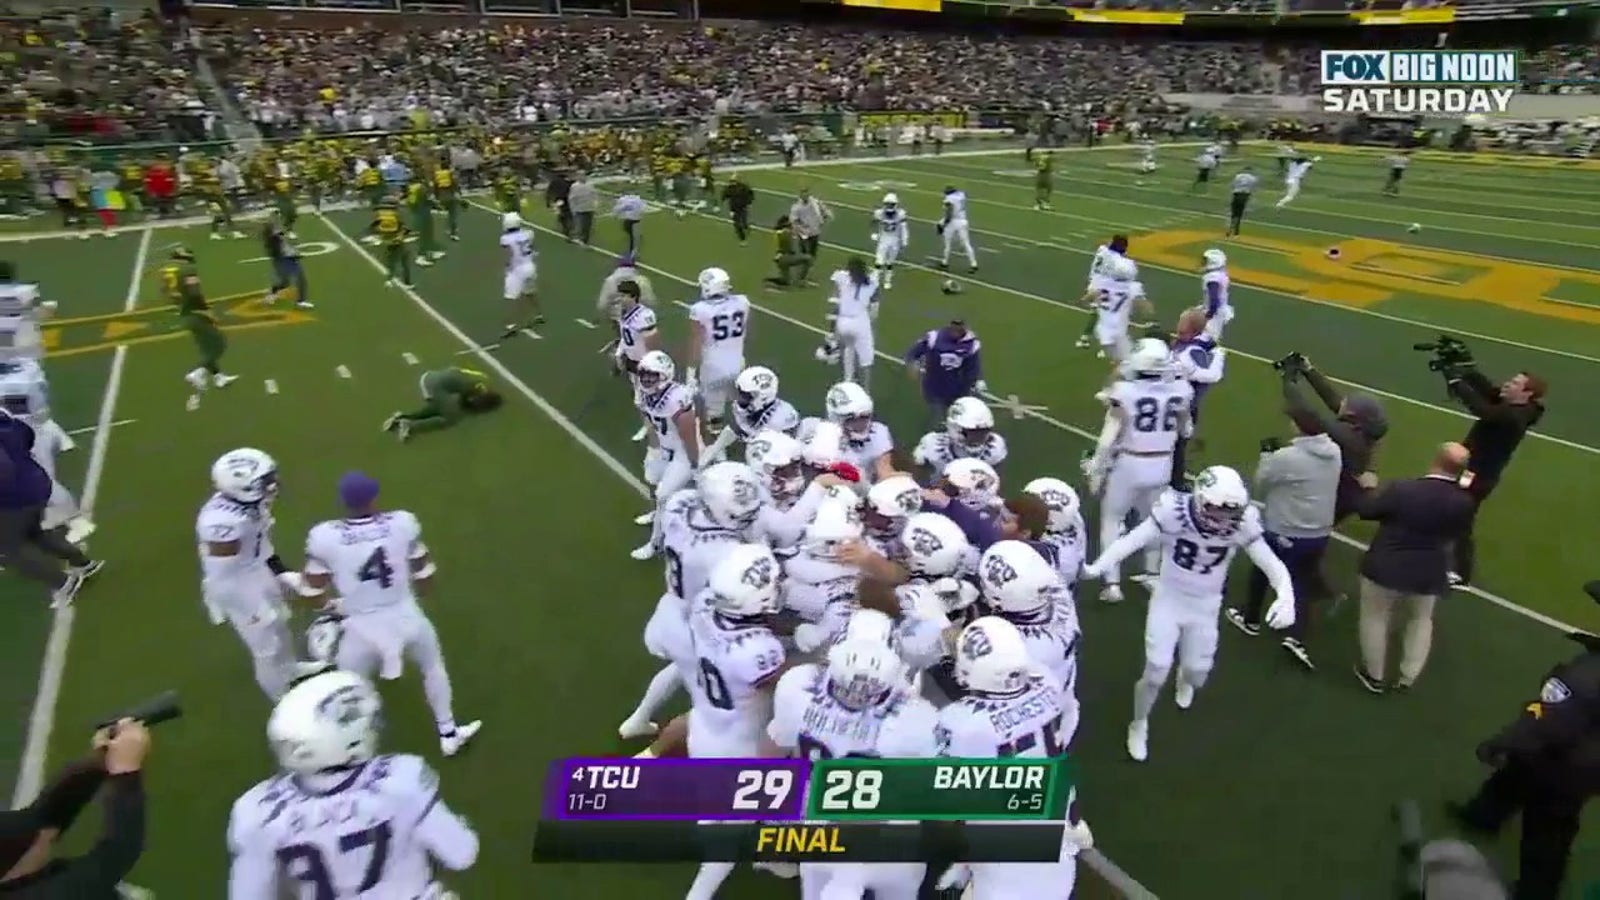 TCU stays undefeated with a last-second FG